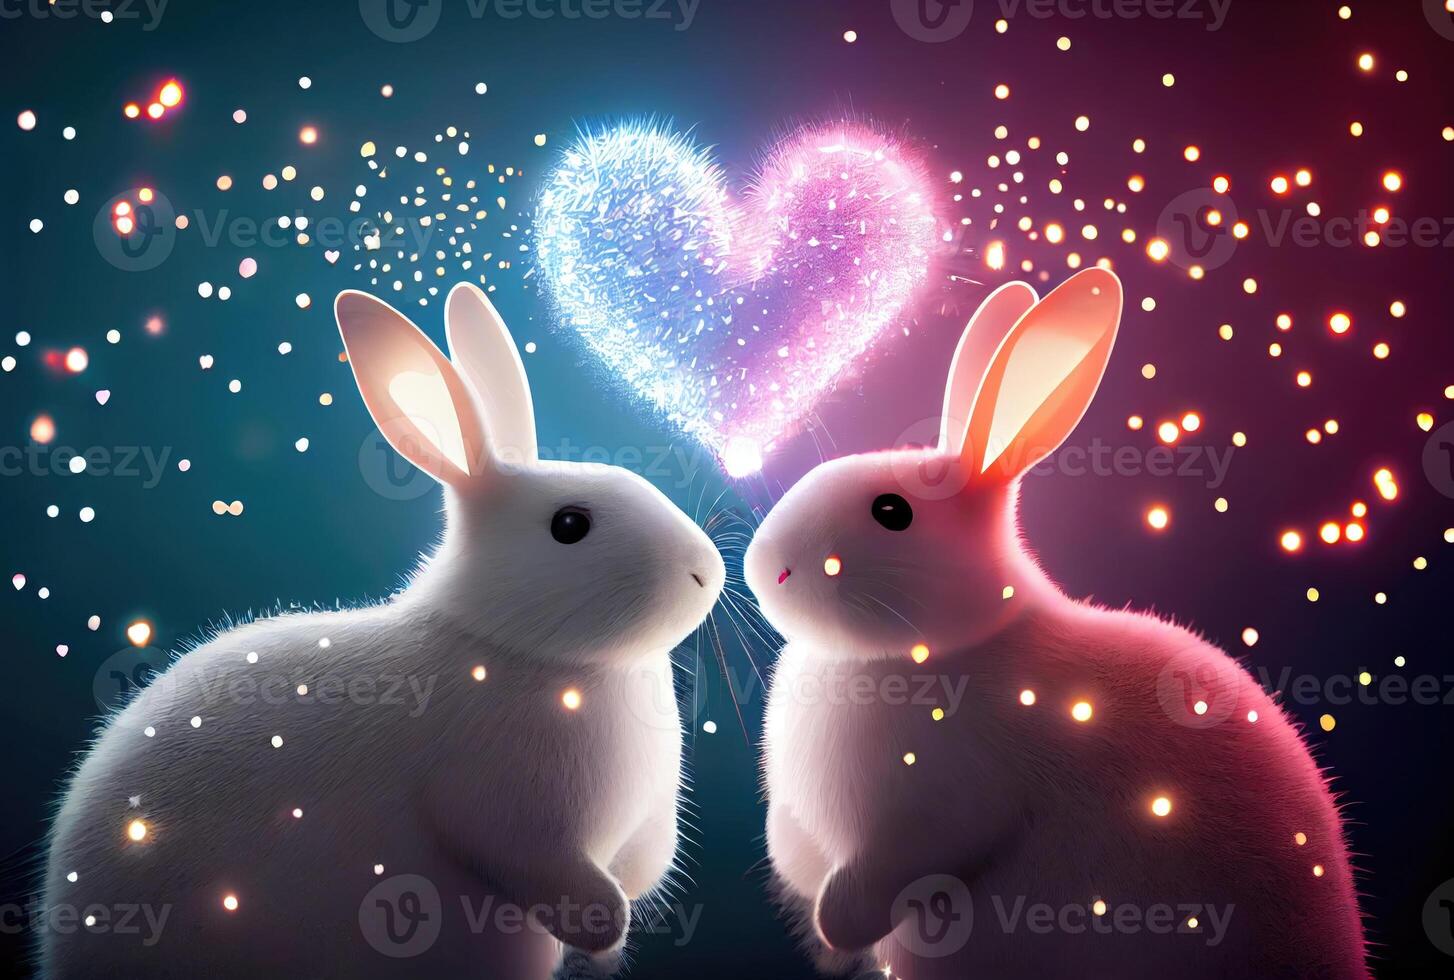 Wallpaper : bunnies, love, couple, heart, families, balloon, Valentine,  calico, critters, rabbits, amore, sylvanian 2300x1670 - - 959208 - HD  Wallpapers - WallHere